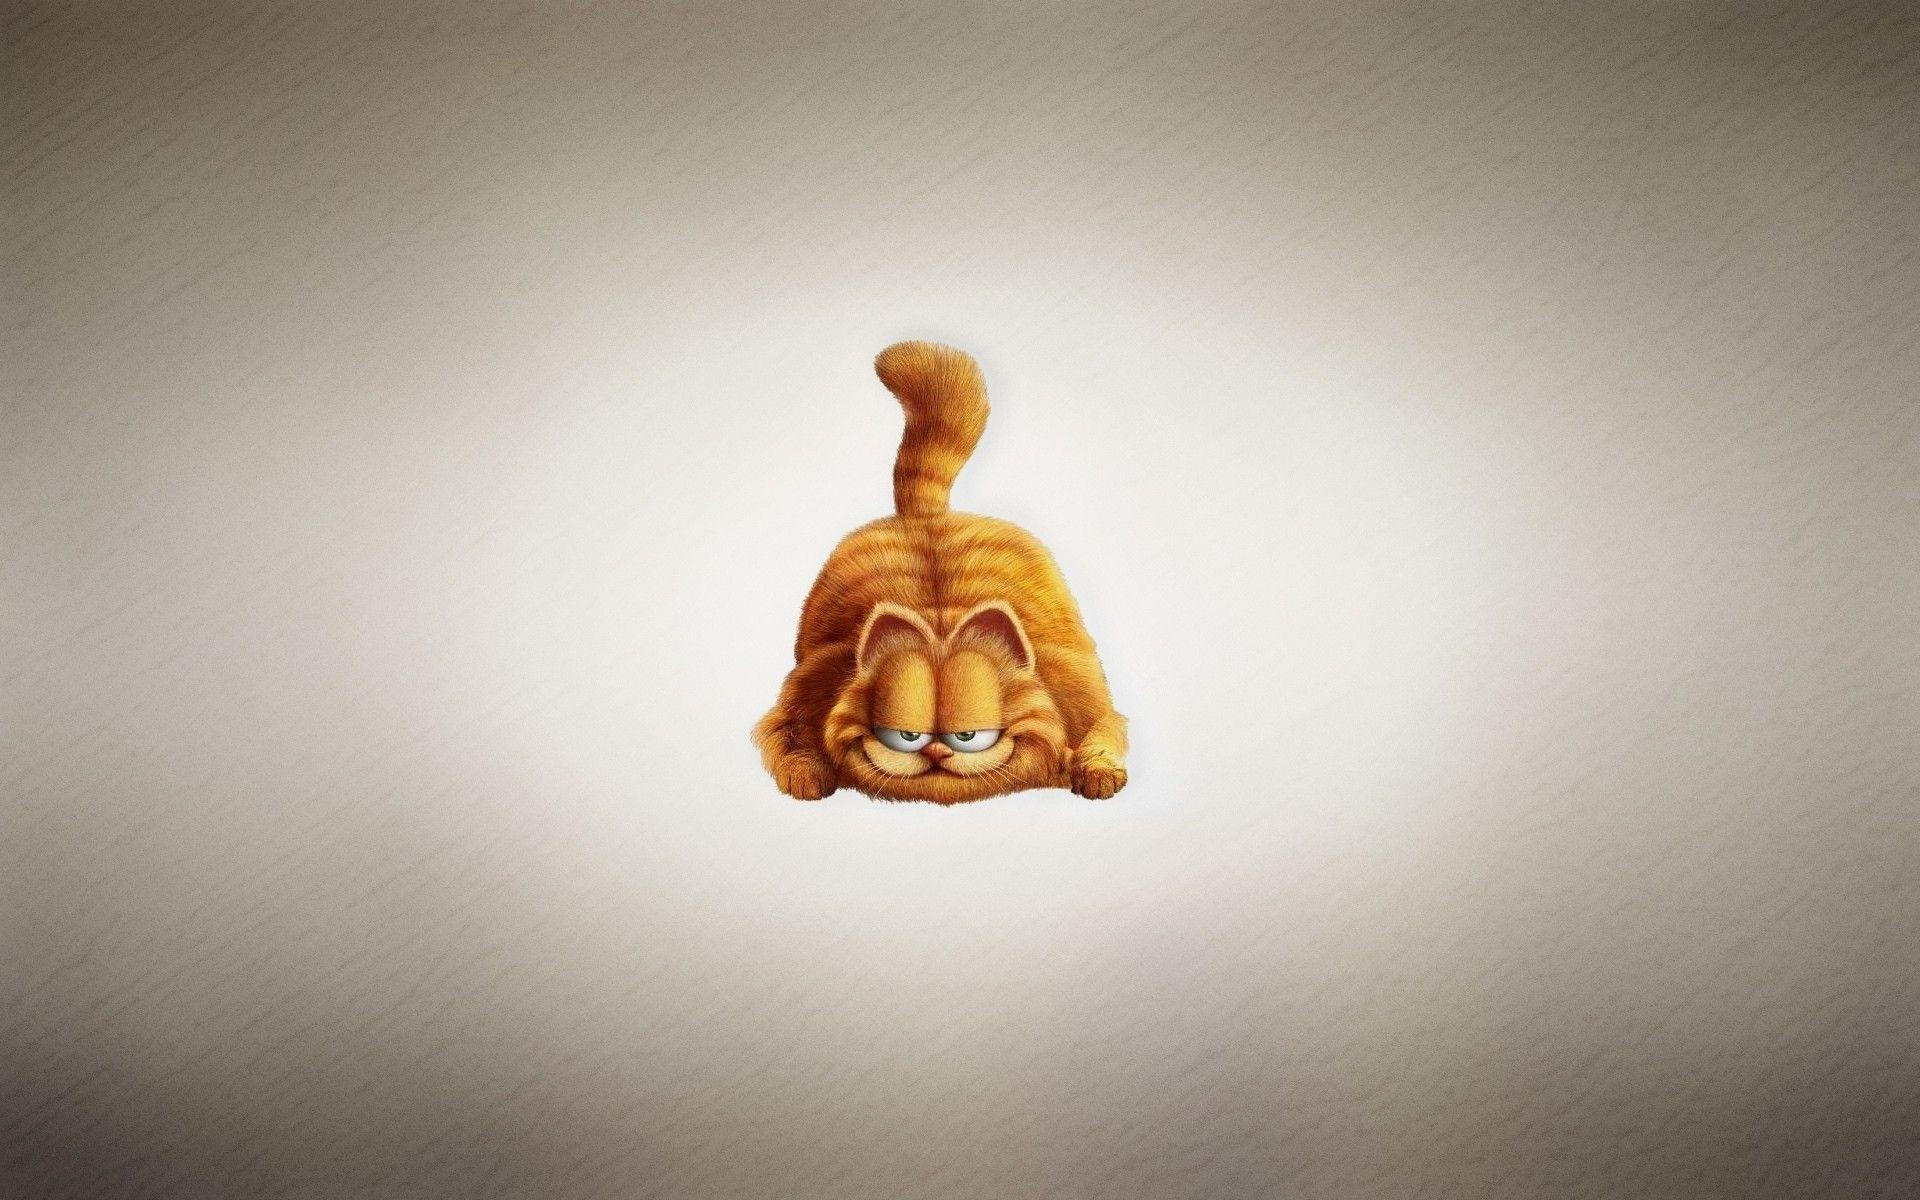 Garfield The Cat. Android wallpaper for free